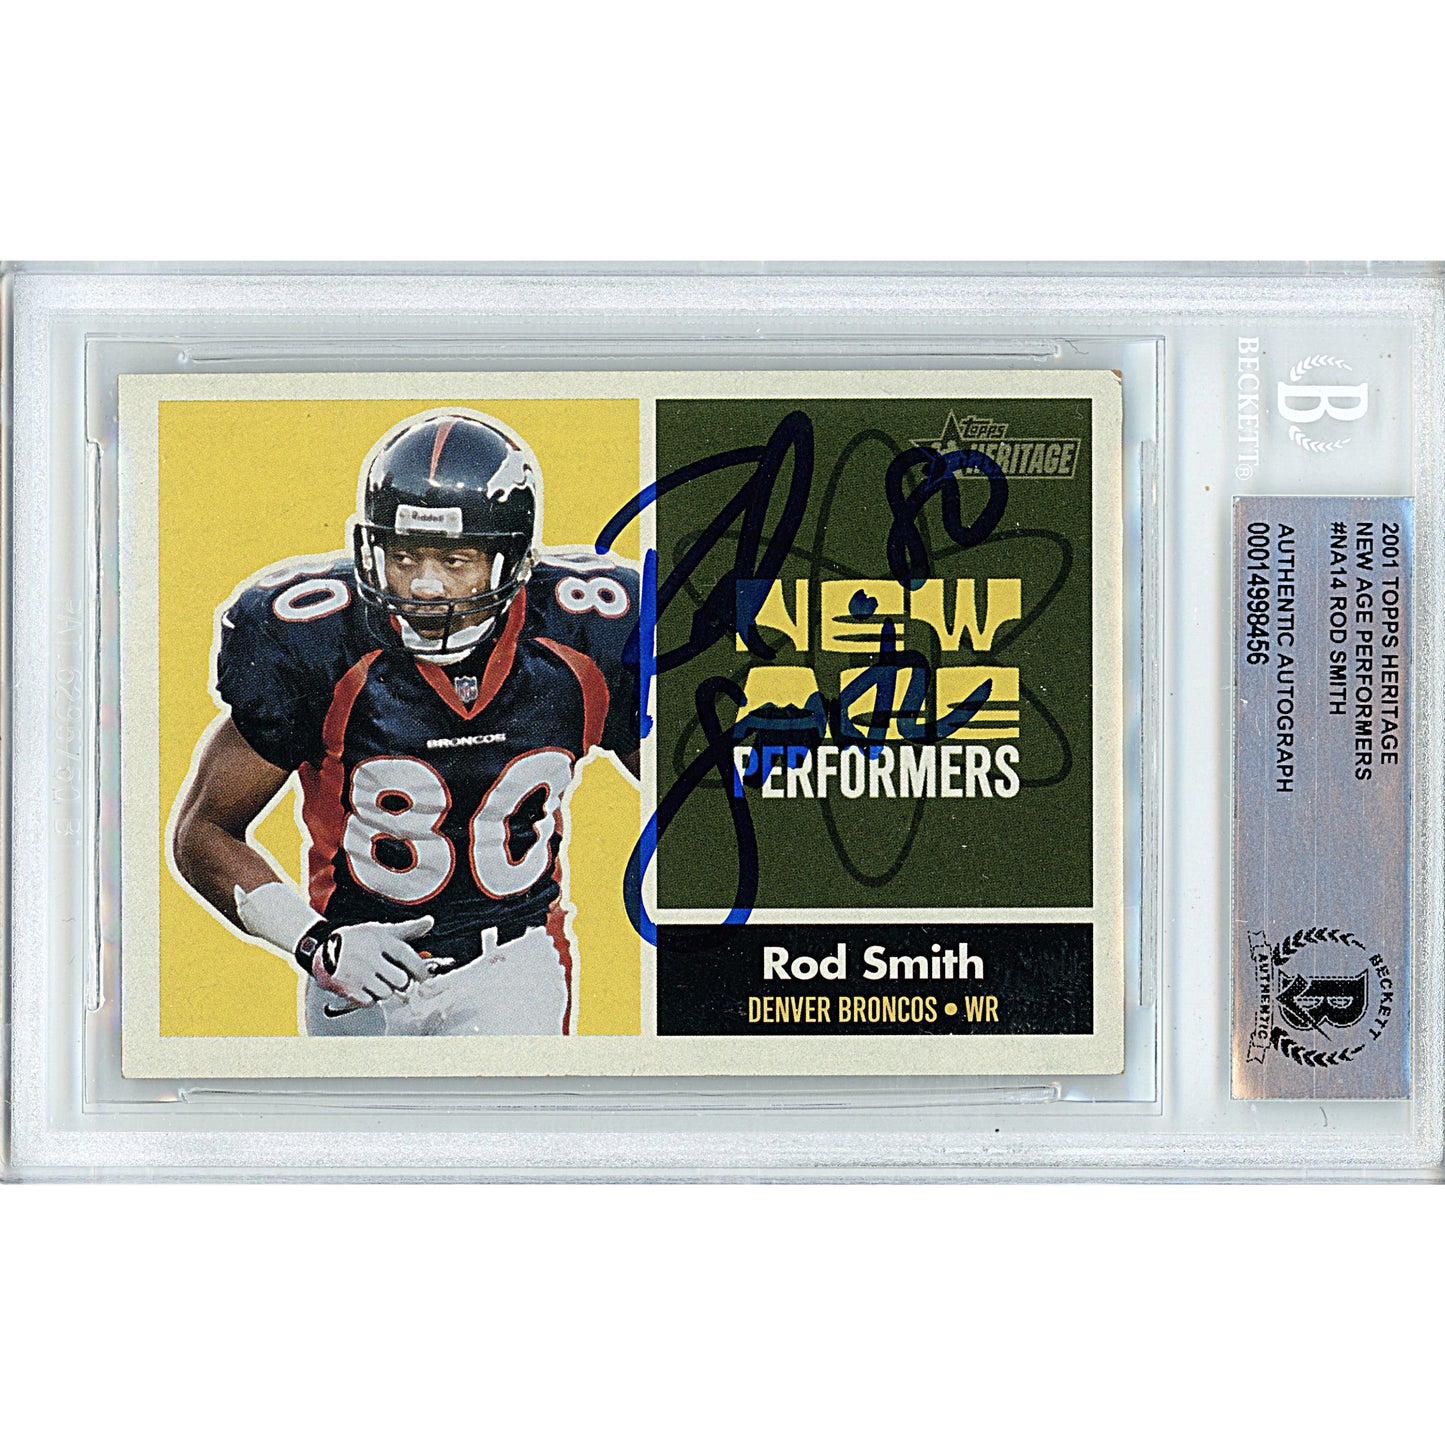 Footballs- Autographed- Rod Smith Signed Denver Broncos 2011 Topps Heritage New Age Performers Insert Football Card Beckett Authentication Slabbed 00014998456 - 101